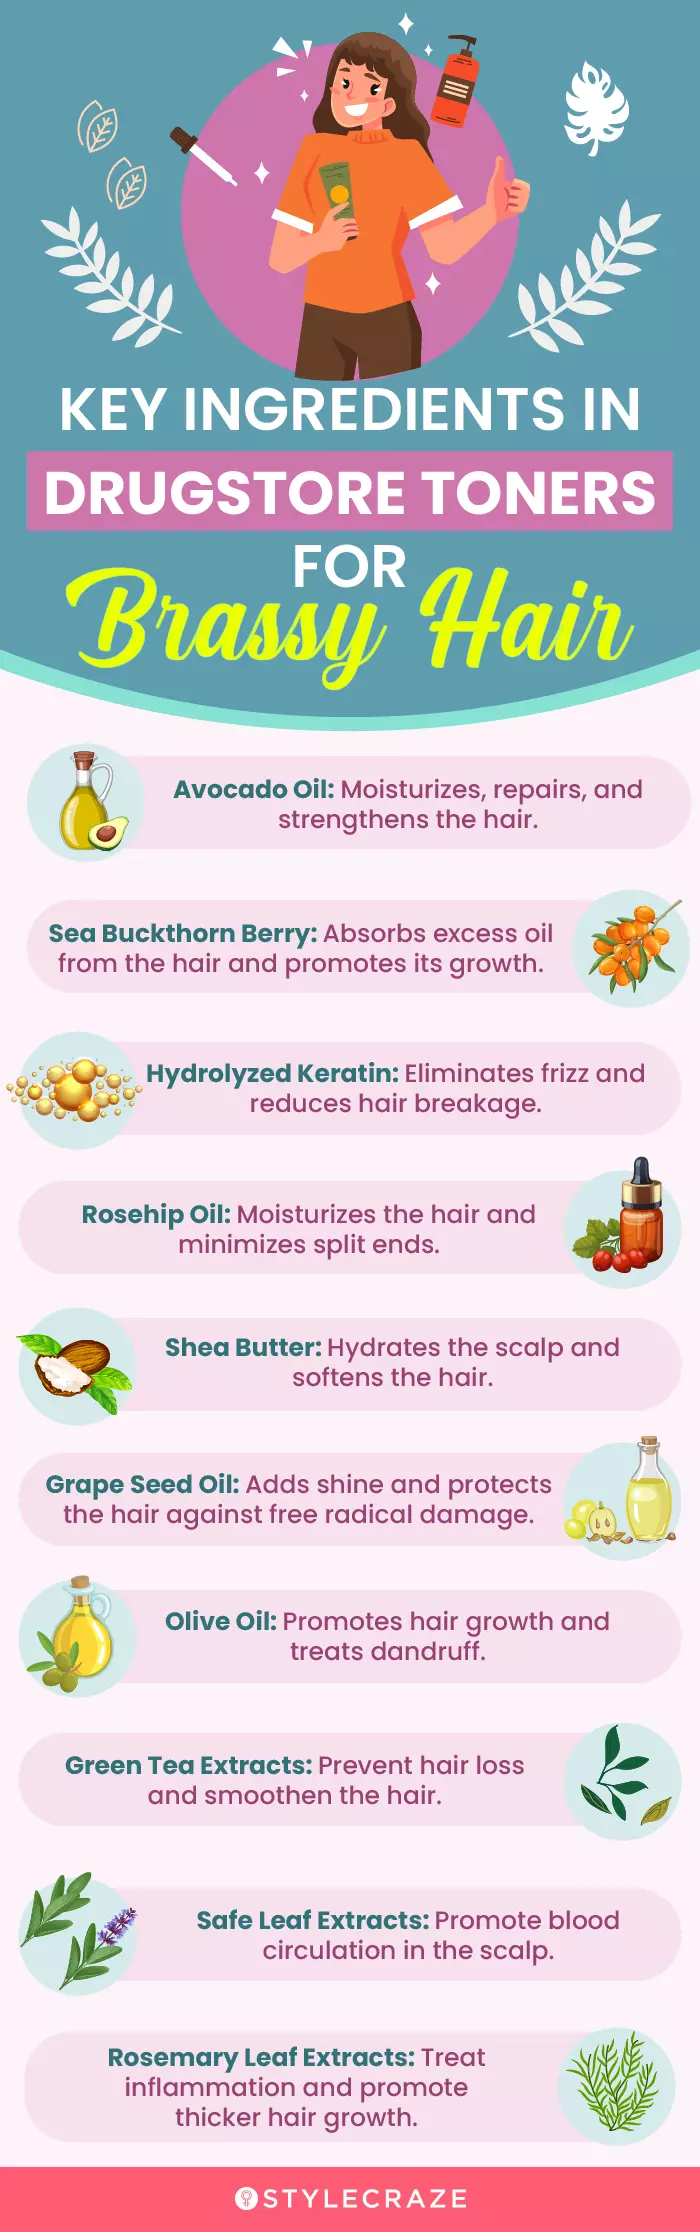 Key Ingredients In Drugstore Toners For Brassy Hair (infographic)